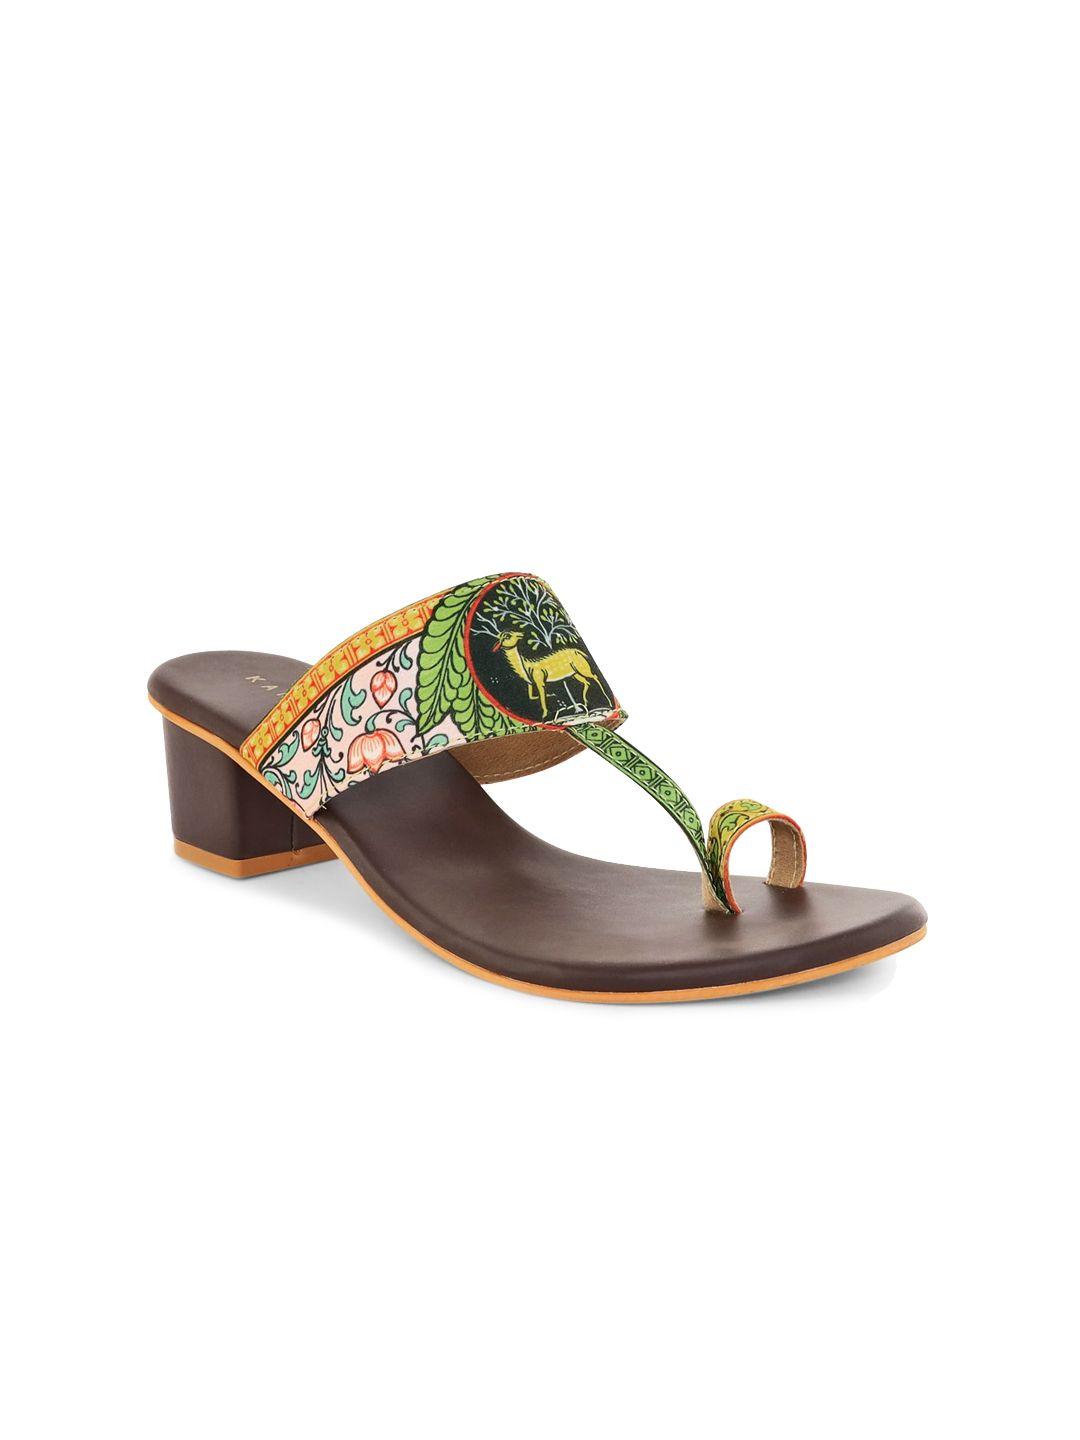 kanvas women multicoloured printed open toe flats with buckles